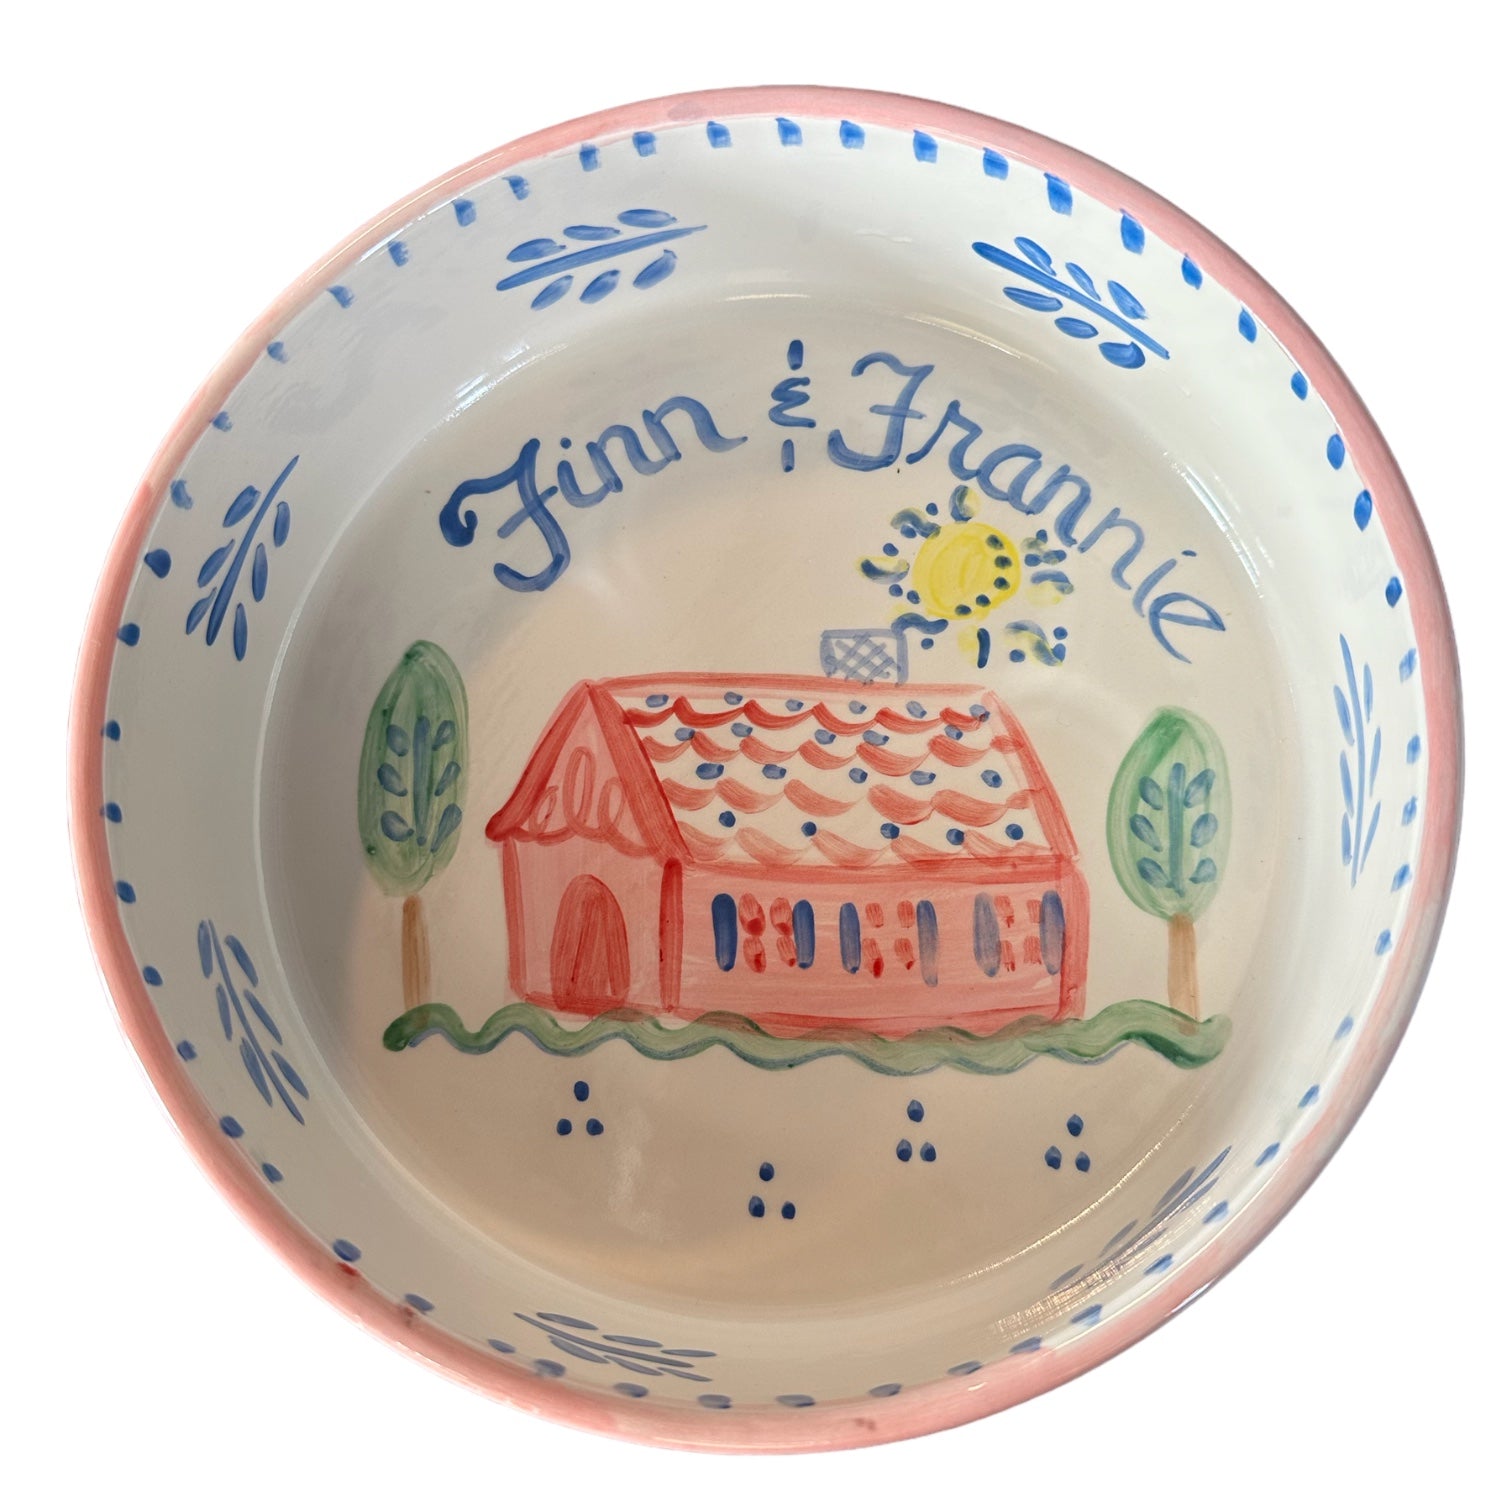 Dog Bowl - Pink House - Premium Dog Bowl from Tricia Lowenfield Design 